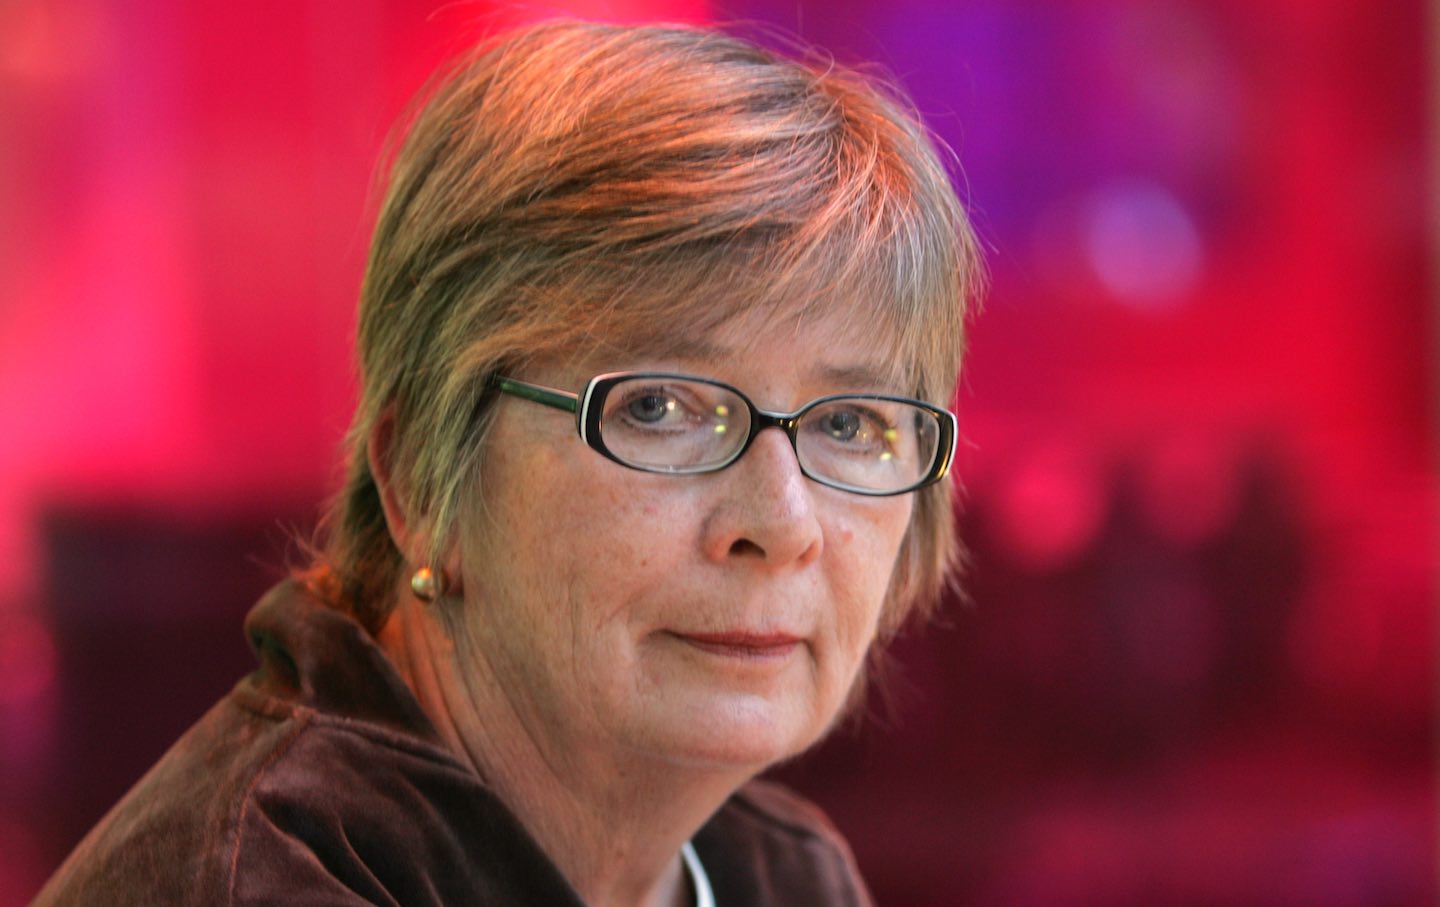 We Lost Barbara Ehrenreich in 2022, but We Can’t Lose Sight of Her Visionary American Socialism